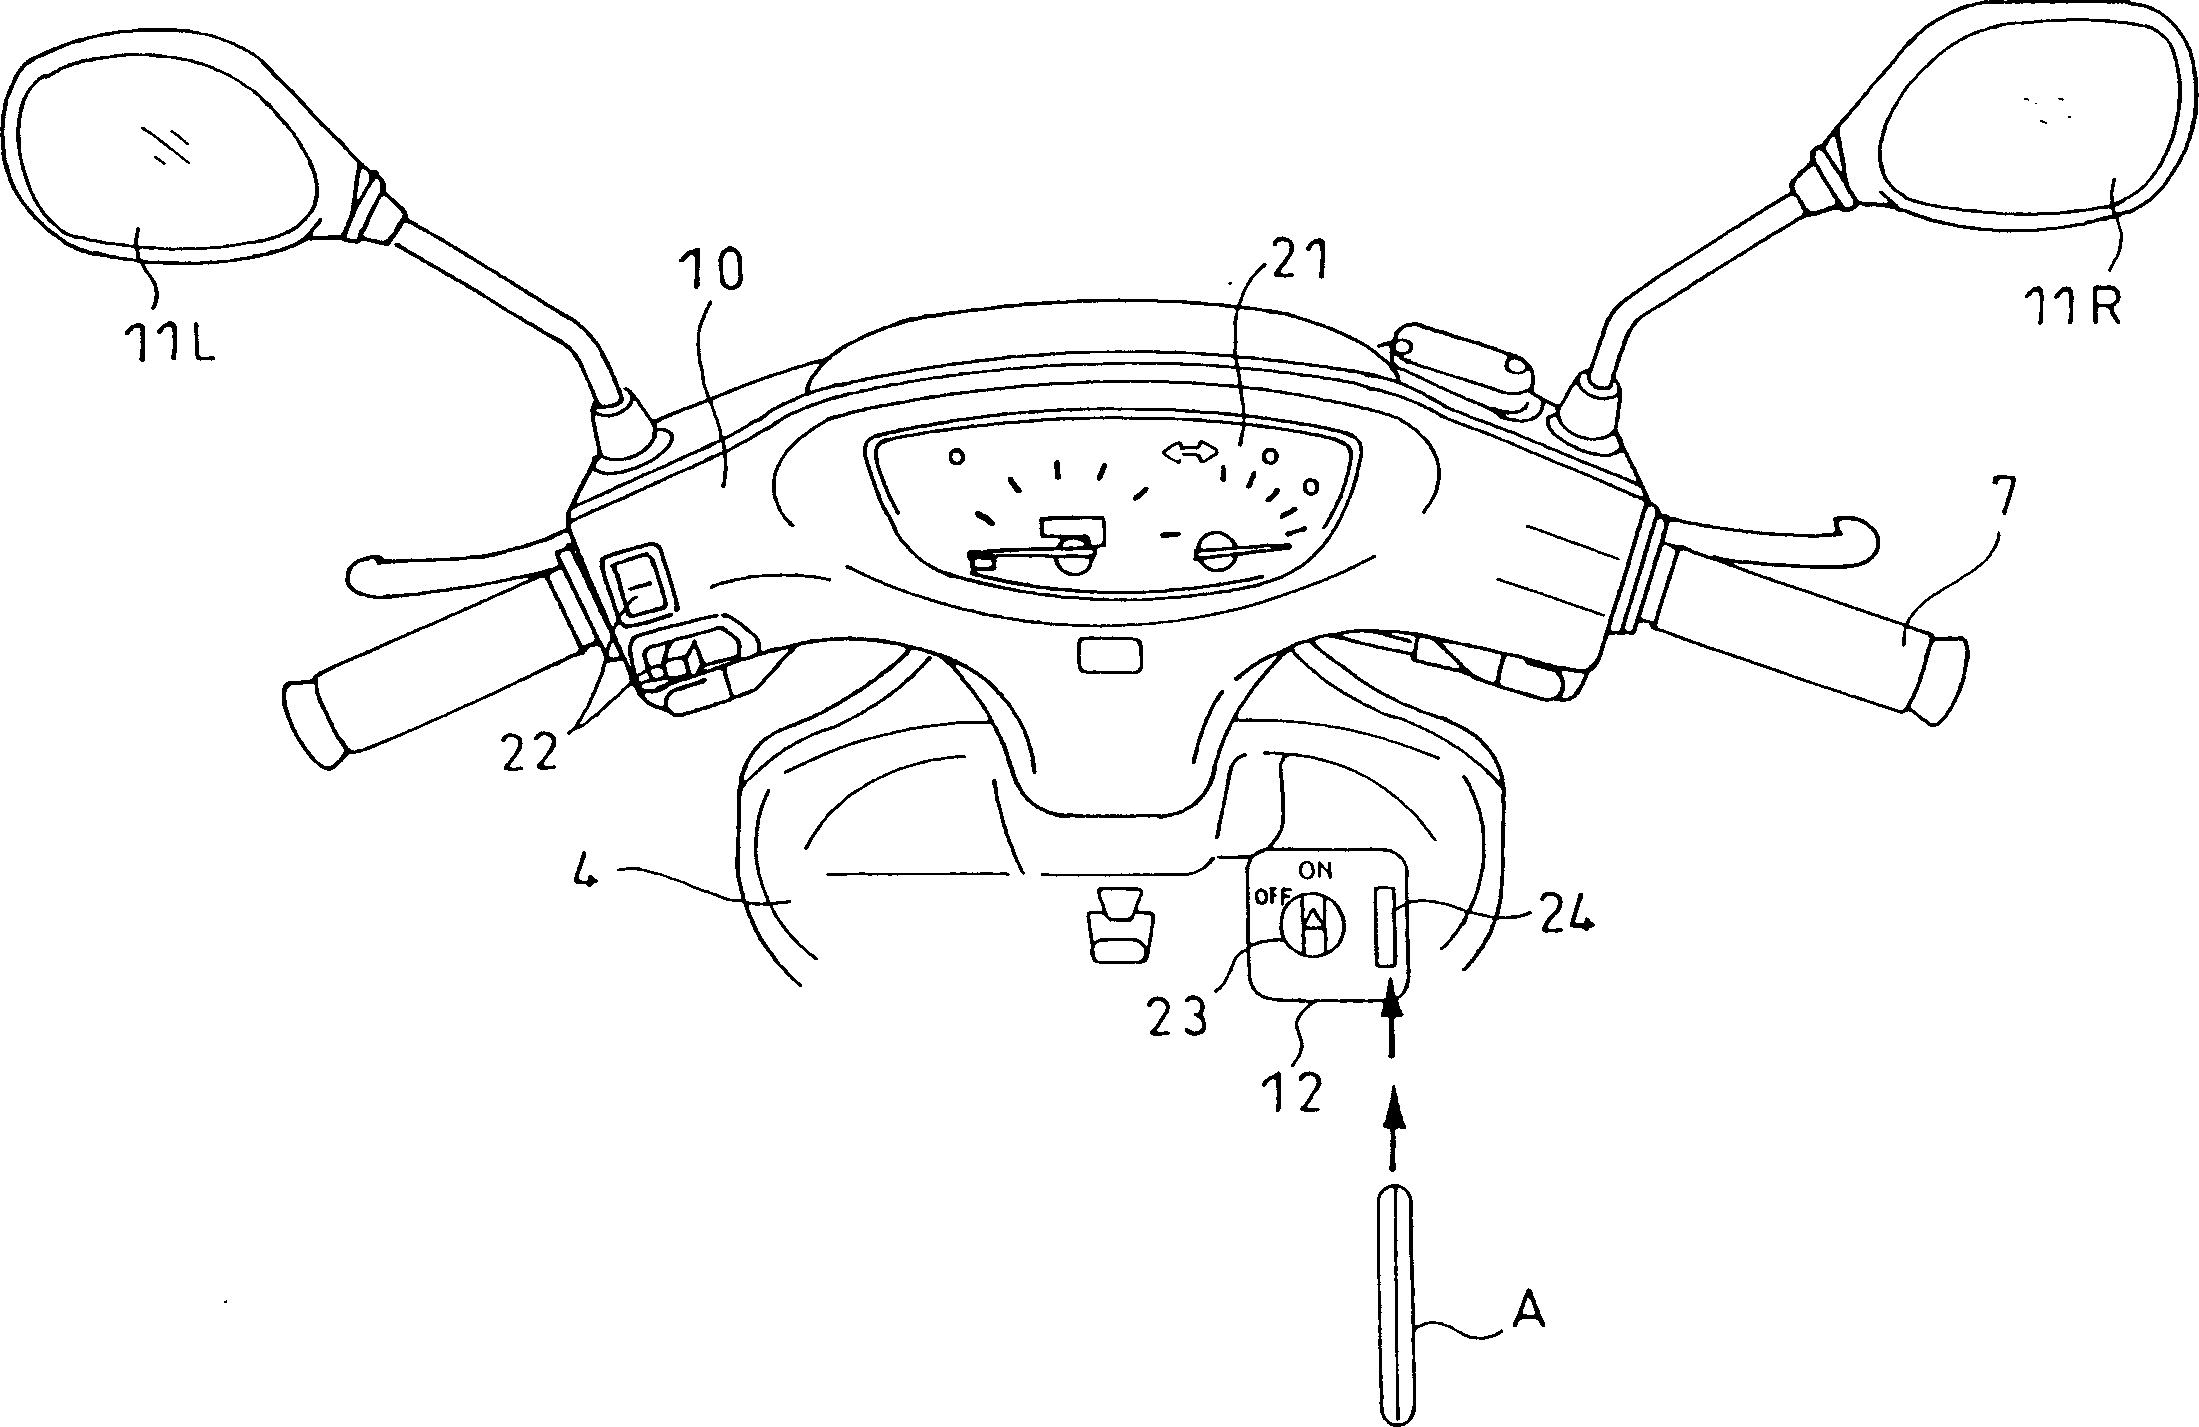 Anti-theft device for motorcycle